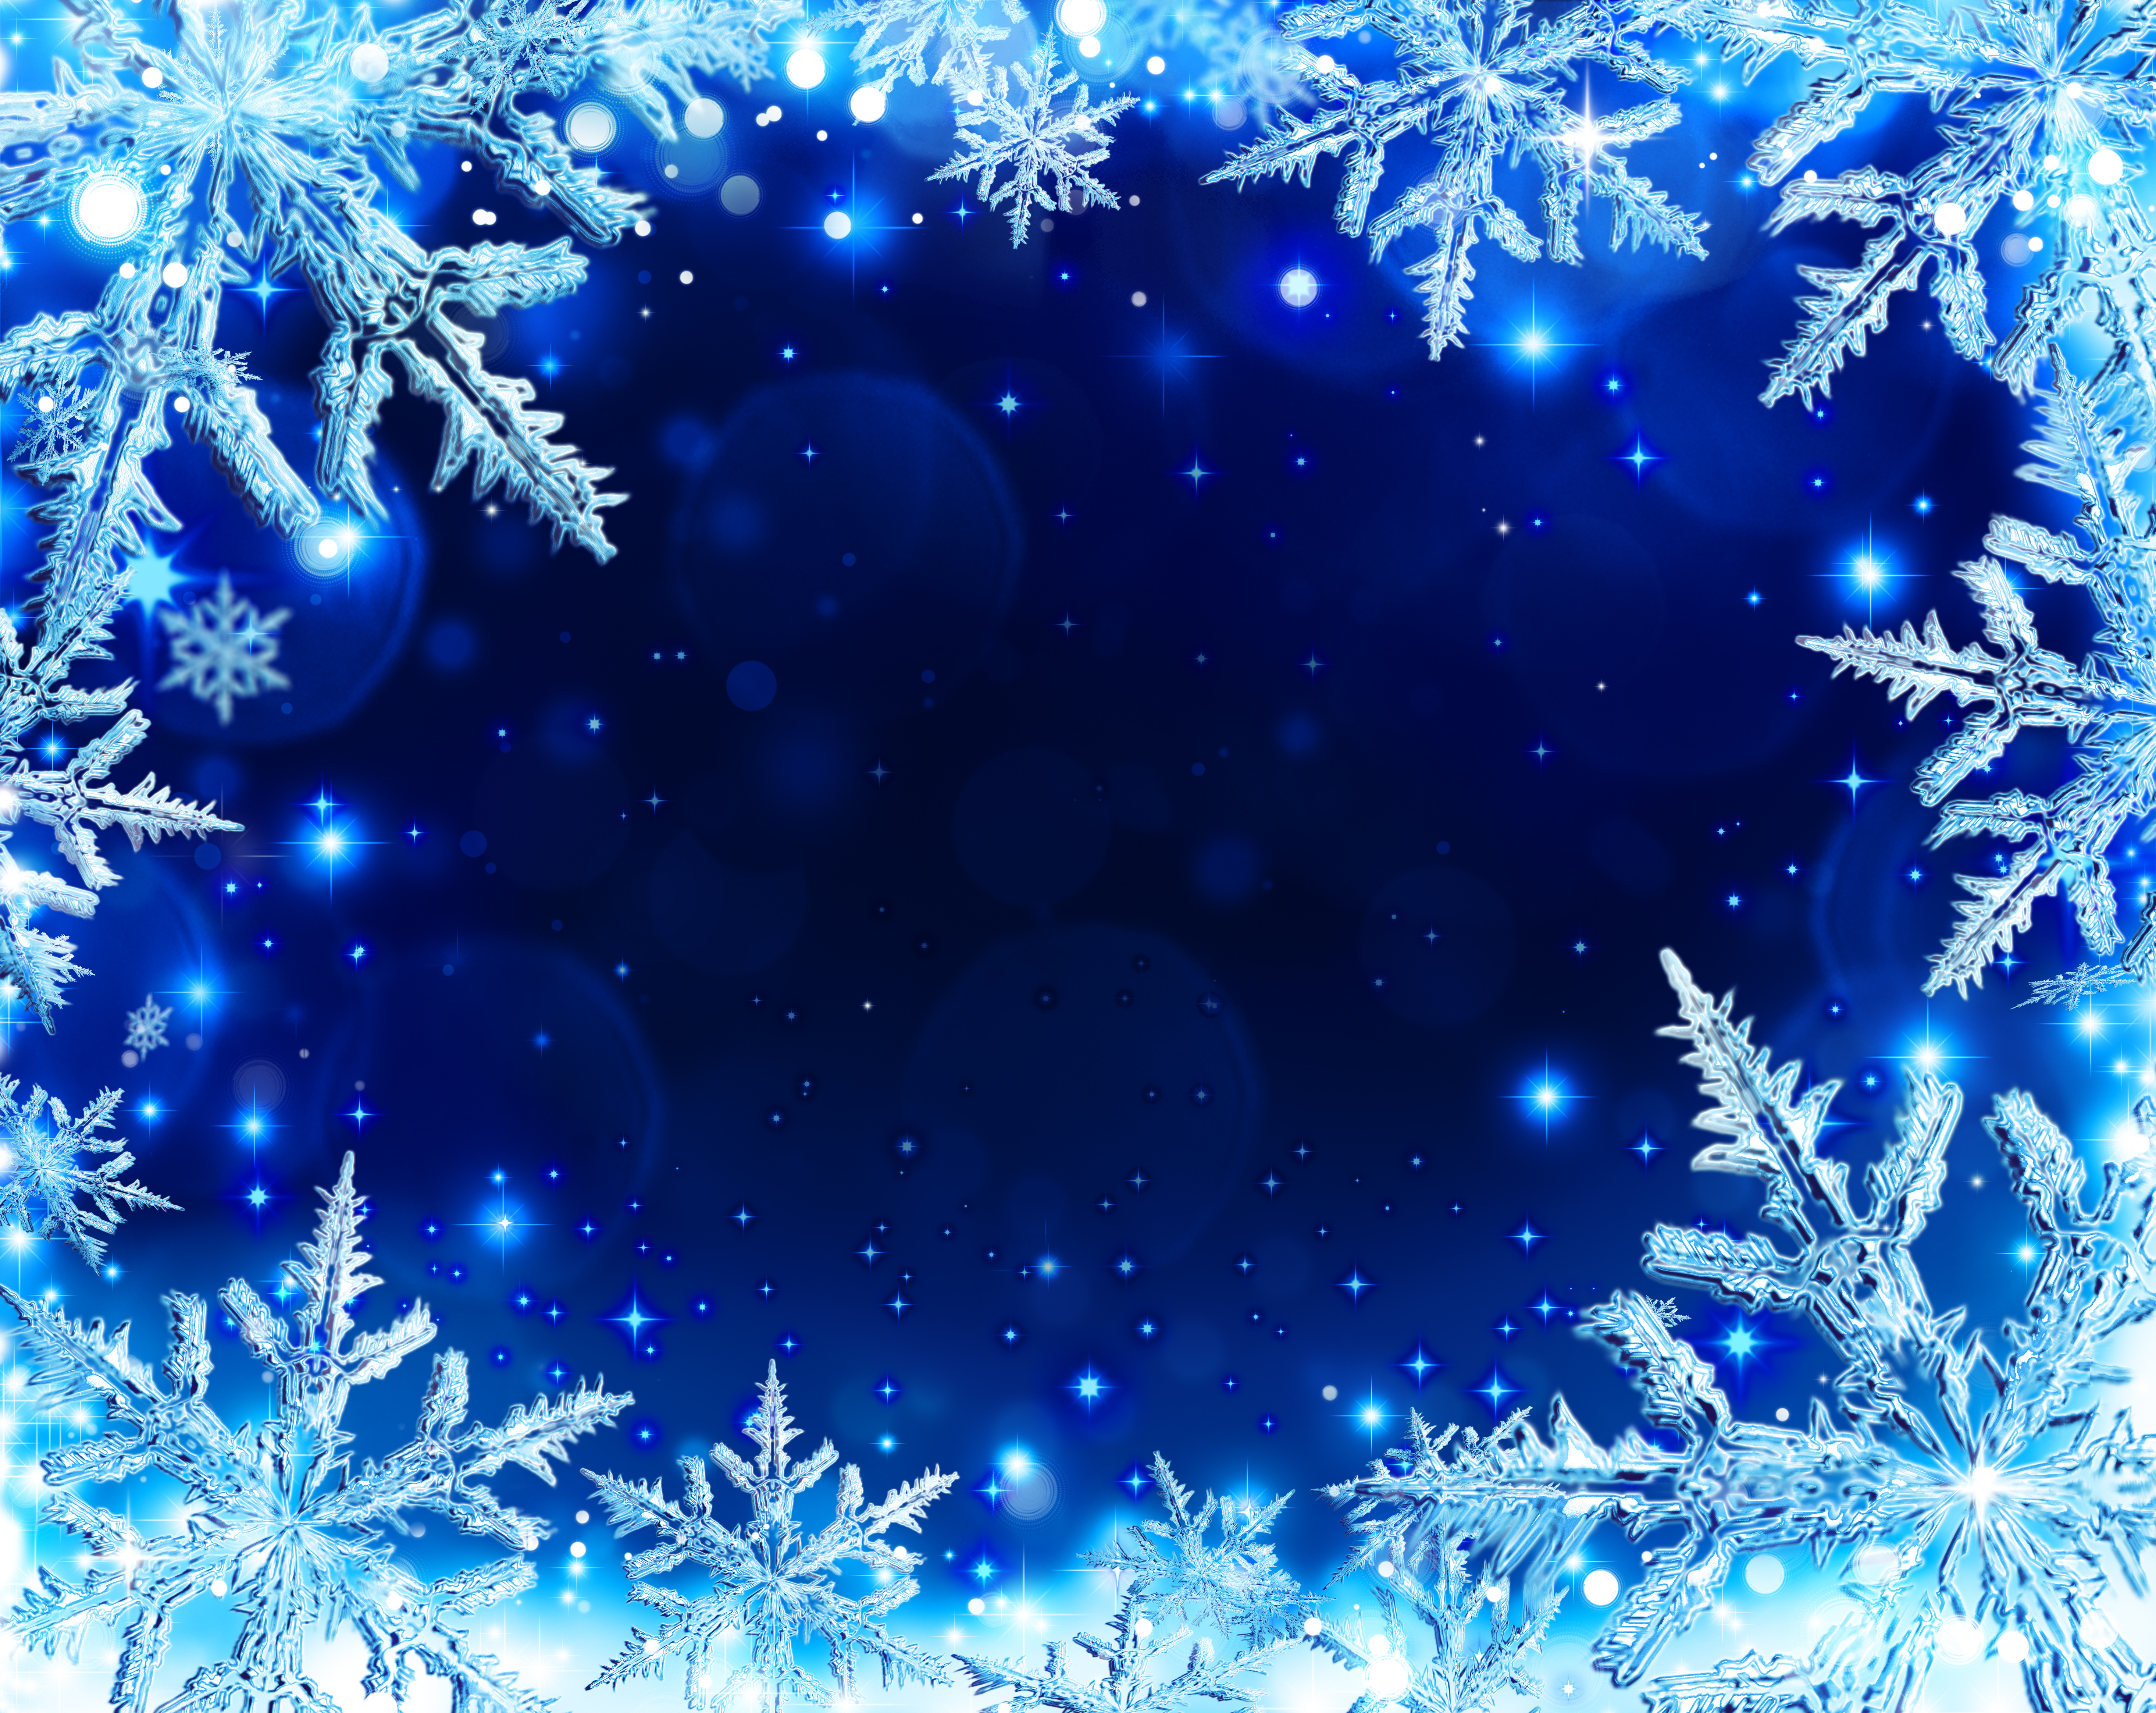 Blue Snowflakes 4k Ultra HD Wallpaper | Background Image | 5863x4657